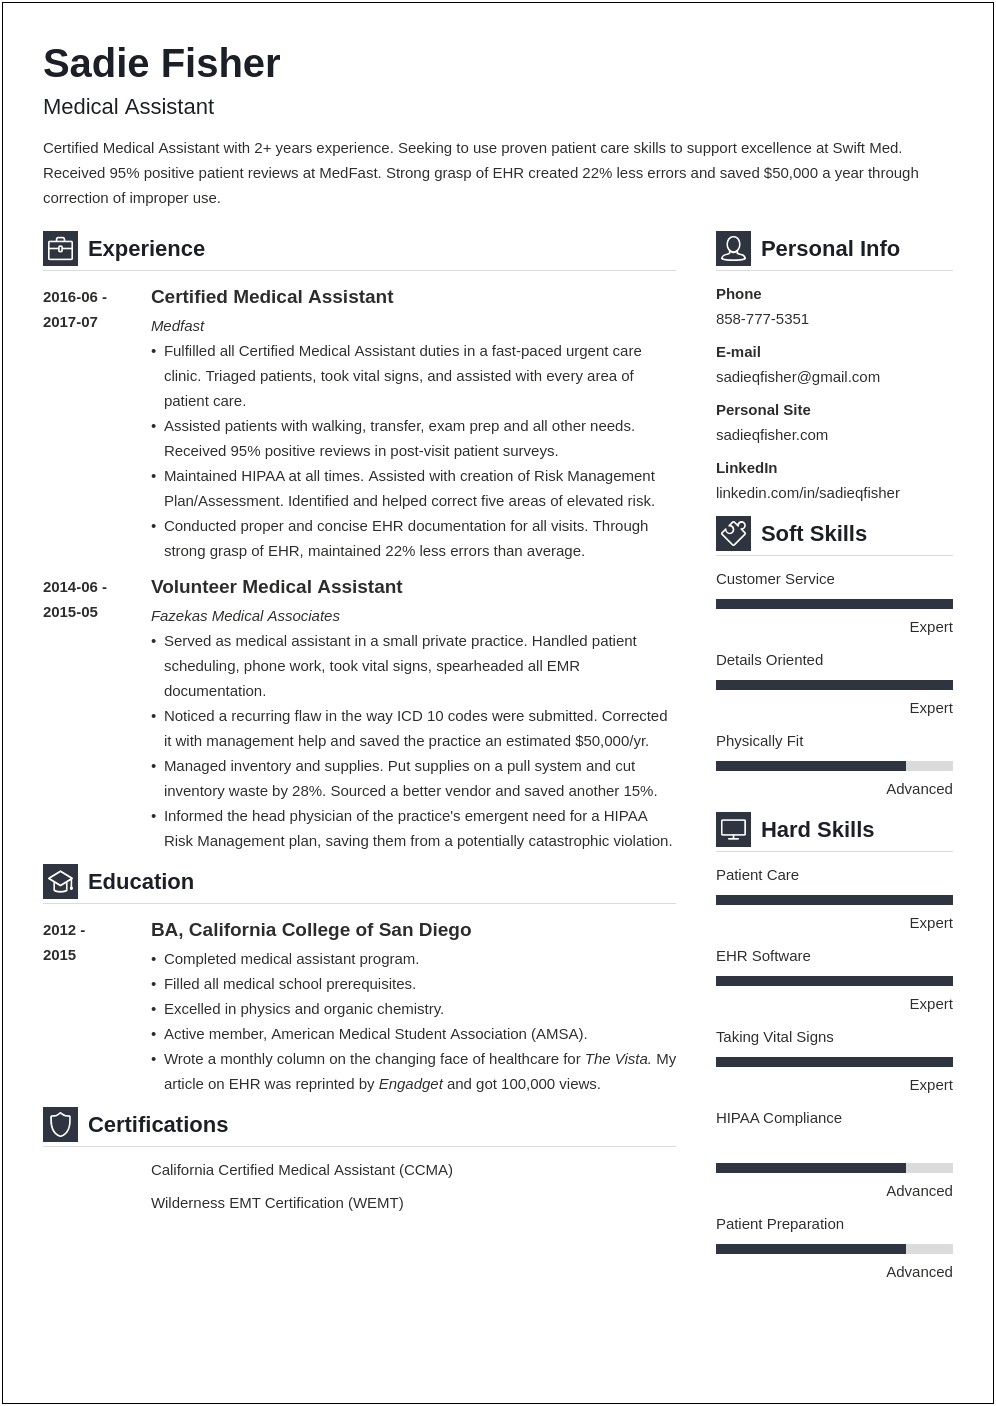 Monster.commedical Assistant Resume Objective Examples Monster.com